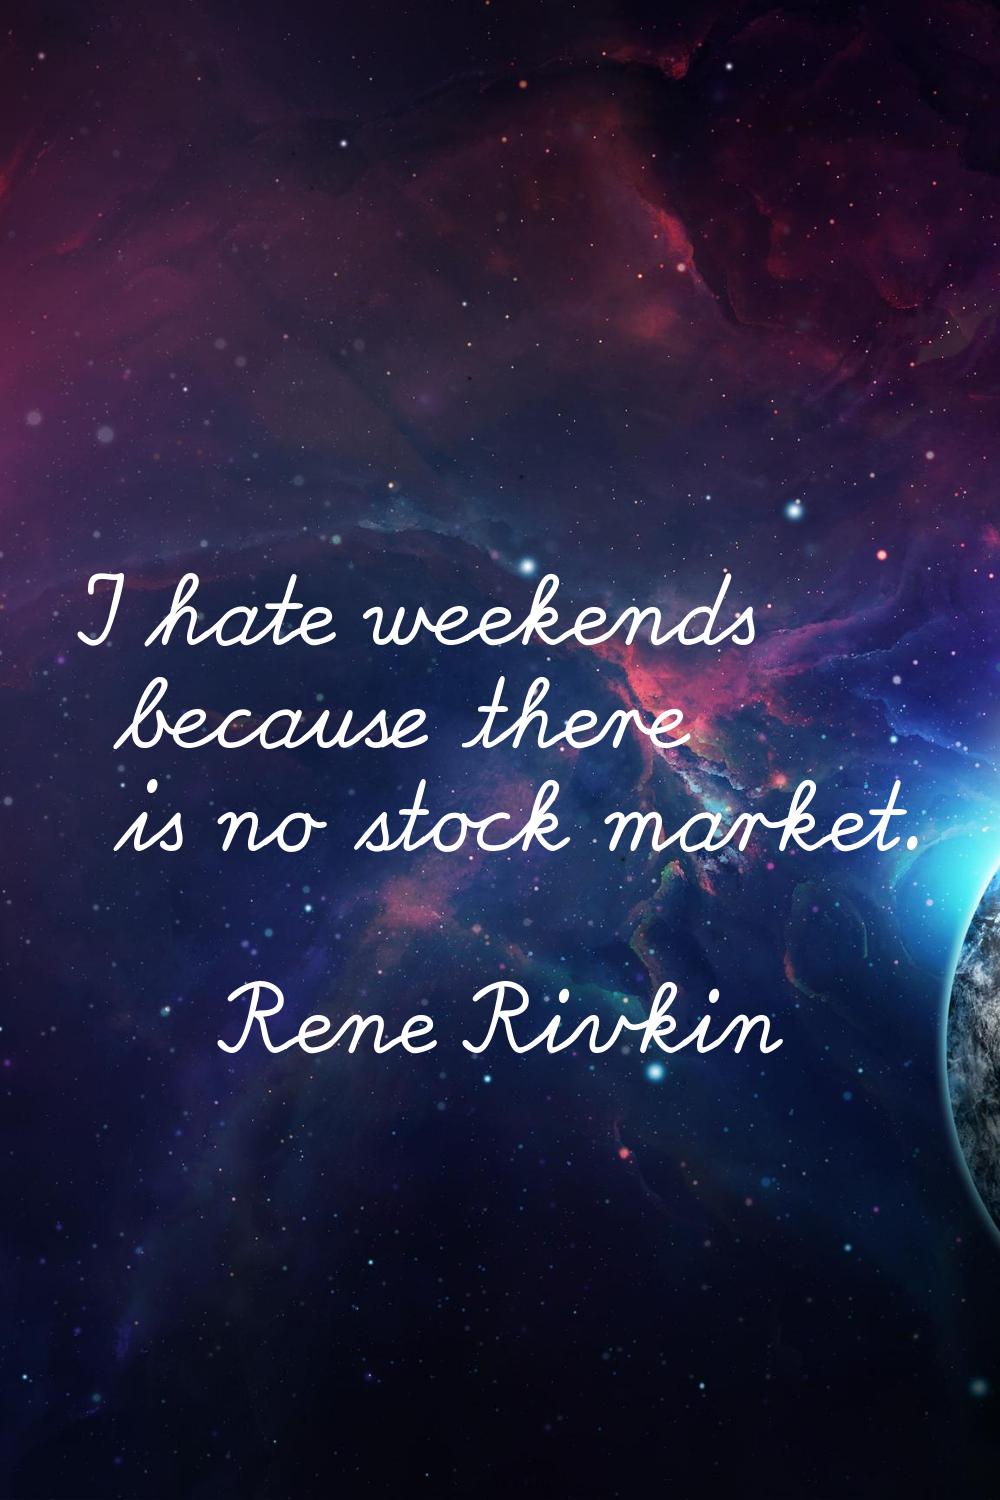 I hate weekends because there is no stock market.